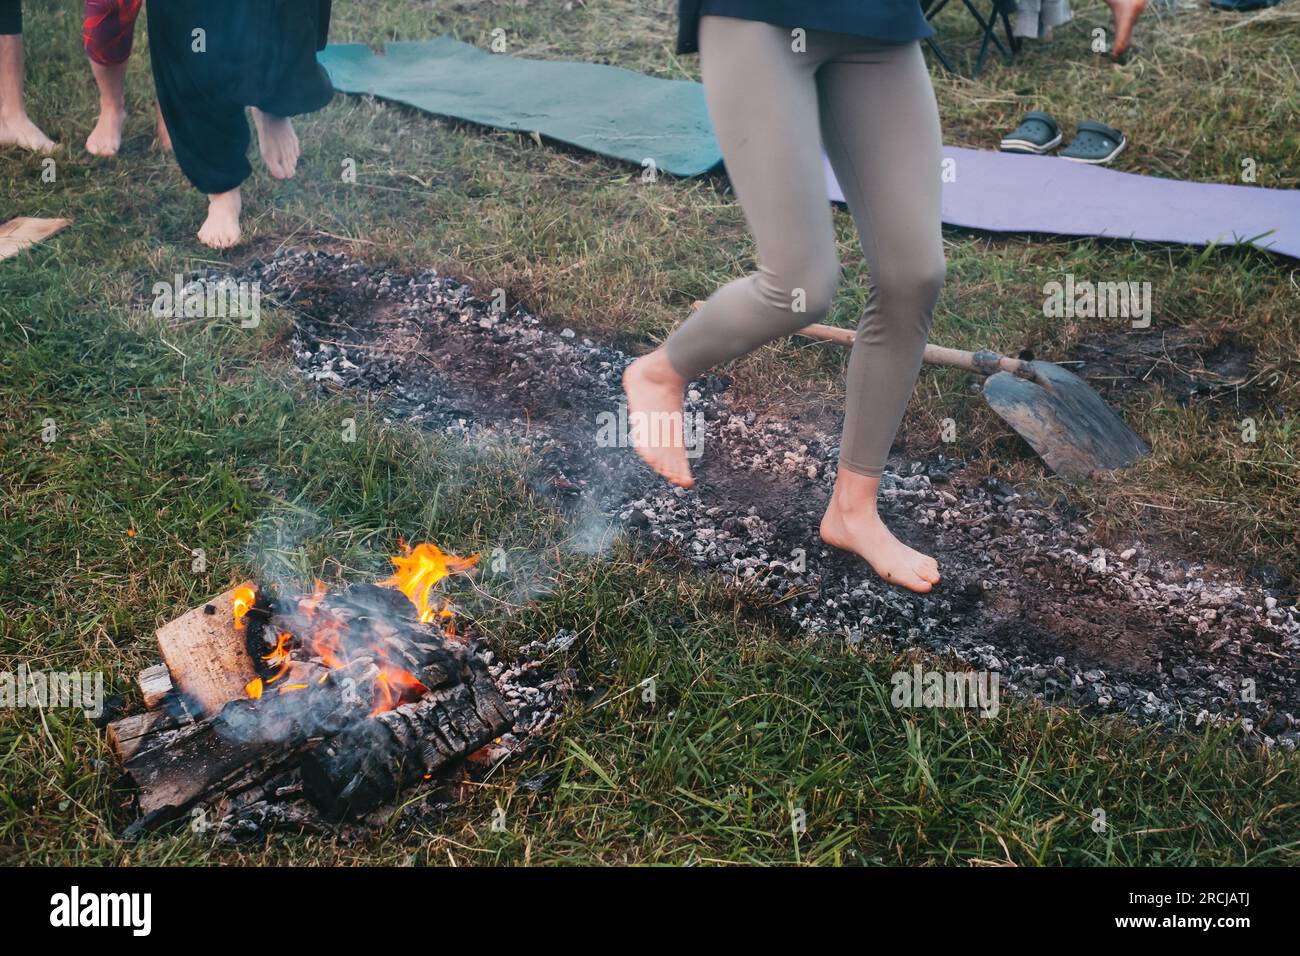 Coal walking or fire walking. Barefoot person on burned wood and hot ...